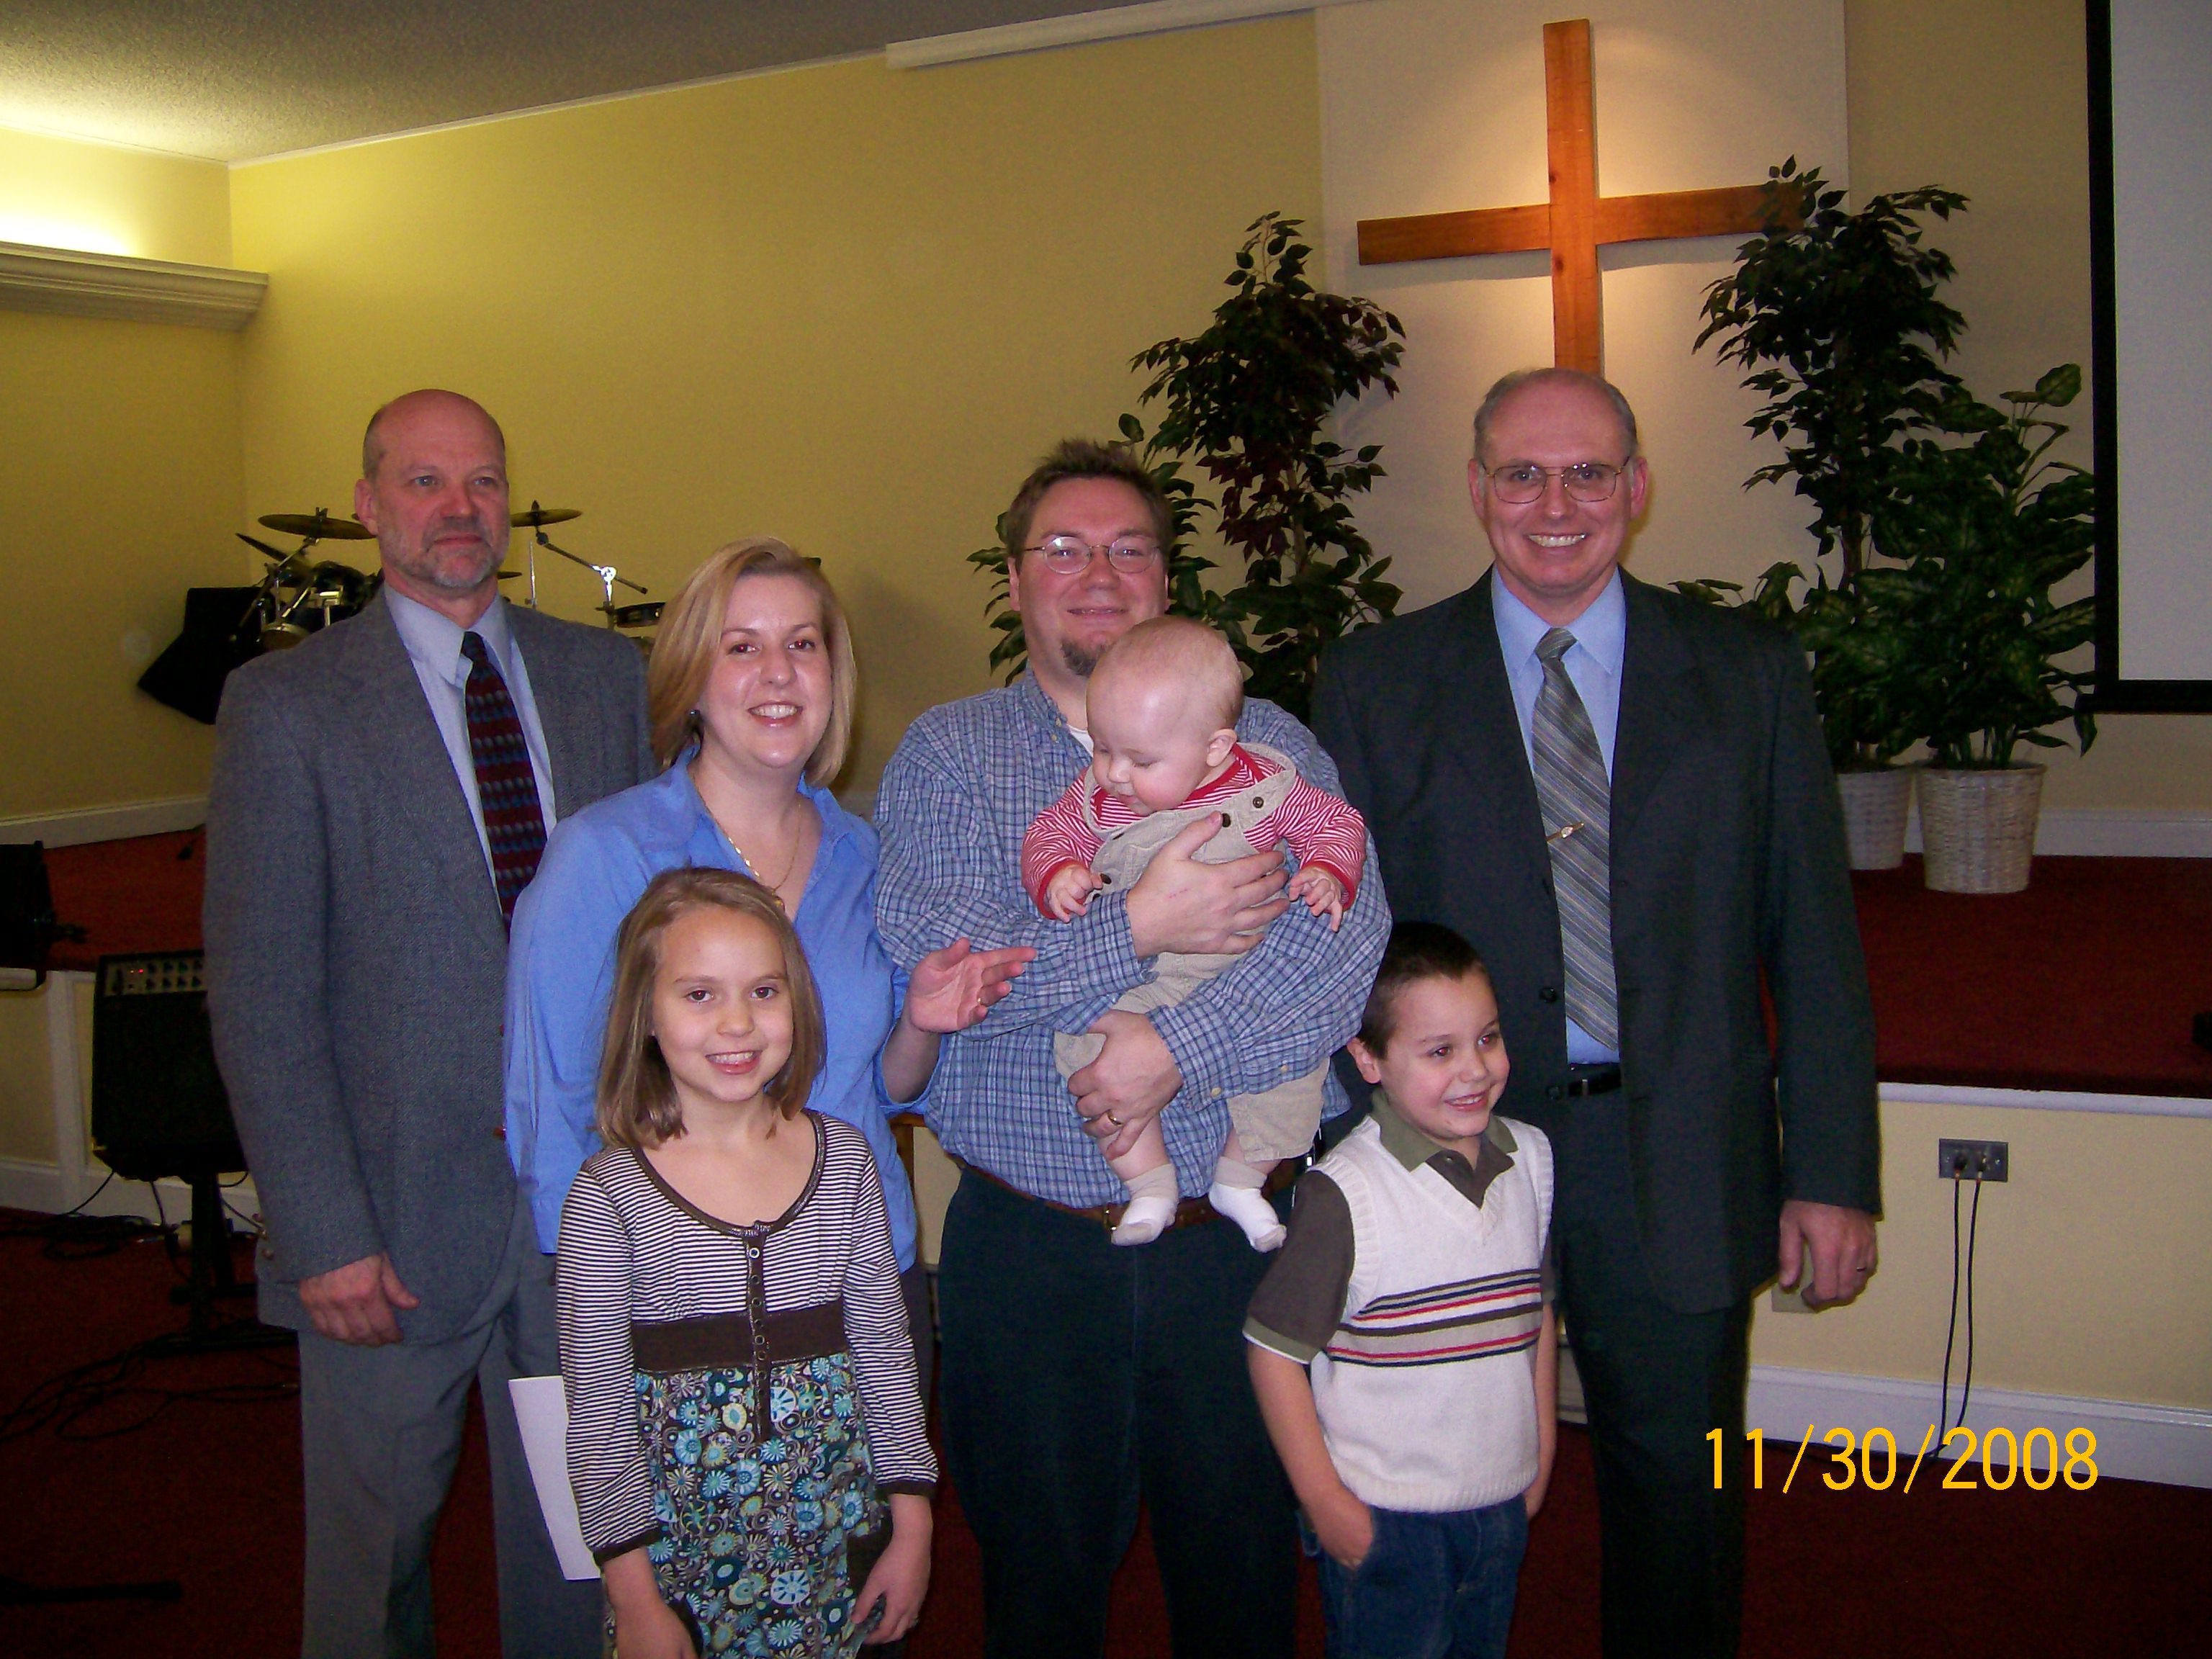 Megan and Dominique Benninger, center, stand with pastors Donald Foose, left, and Bob Conrad, right, at the dedication ceremony for their son, Alexander, in 2008.